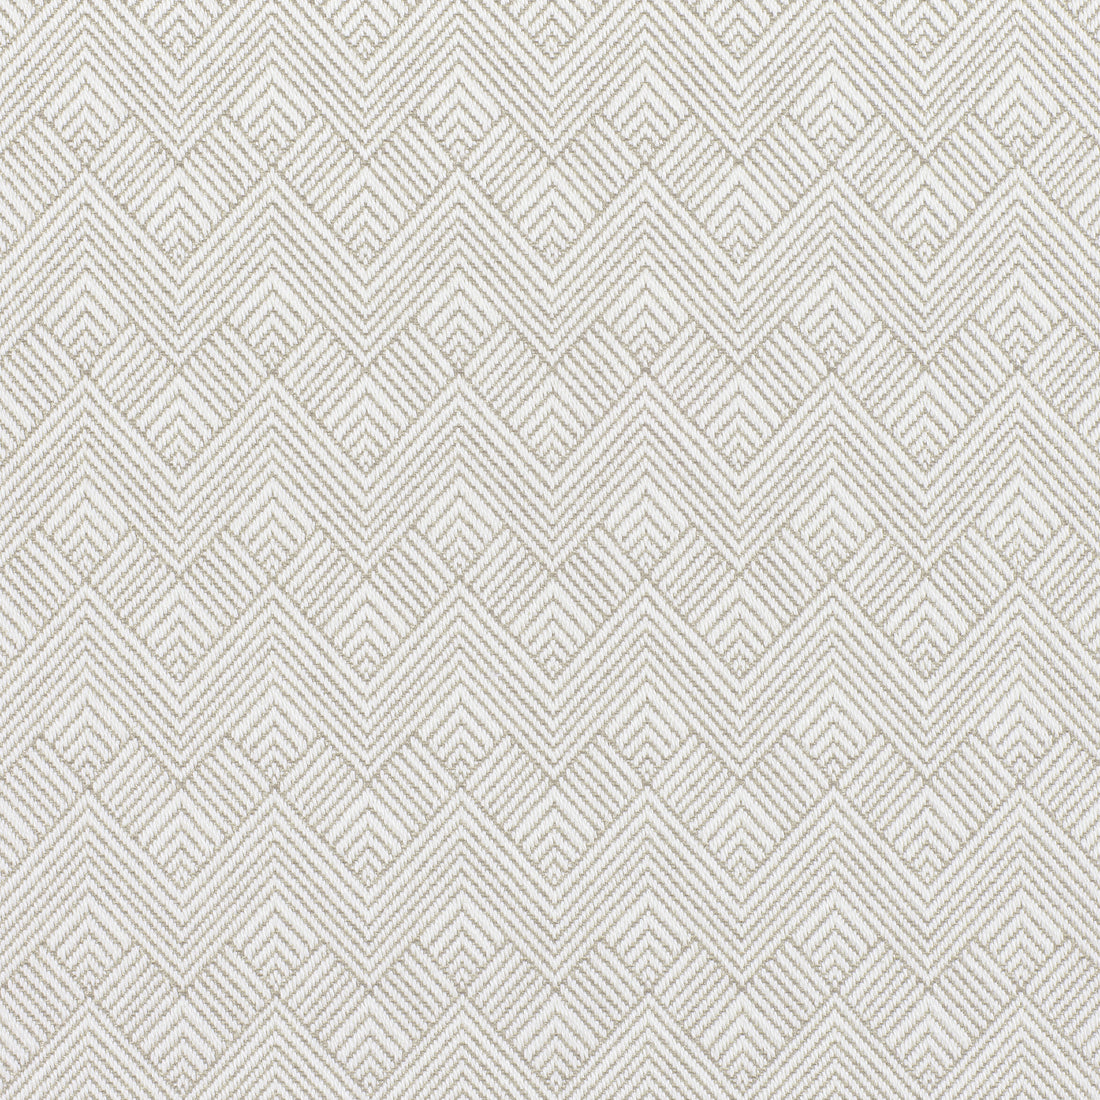 Maddox fabric in jute color - pattern number W73333 - by Thibaut in the Nomad collection